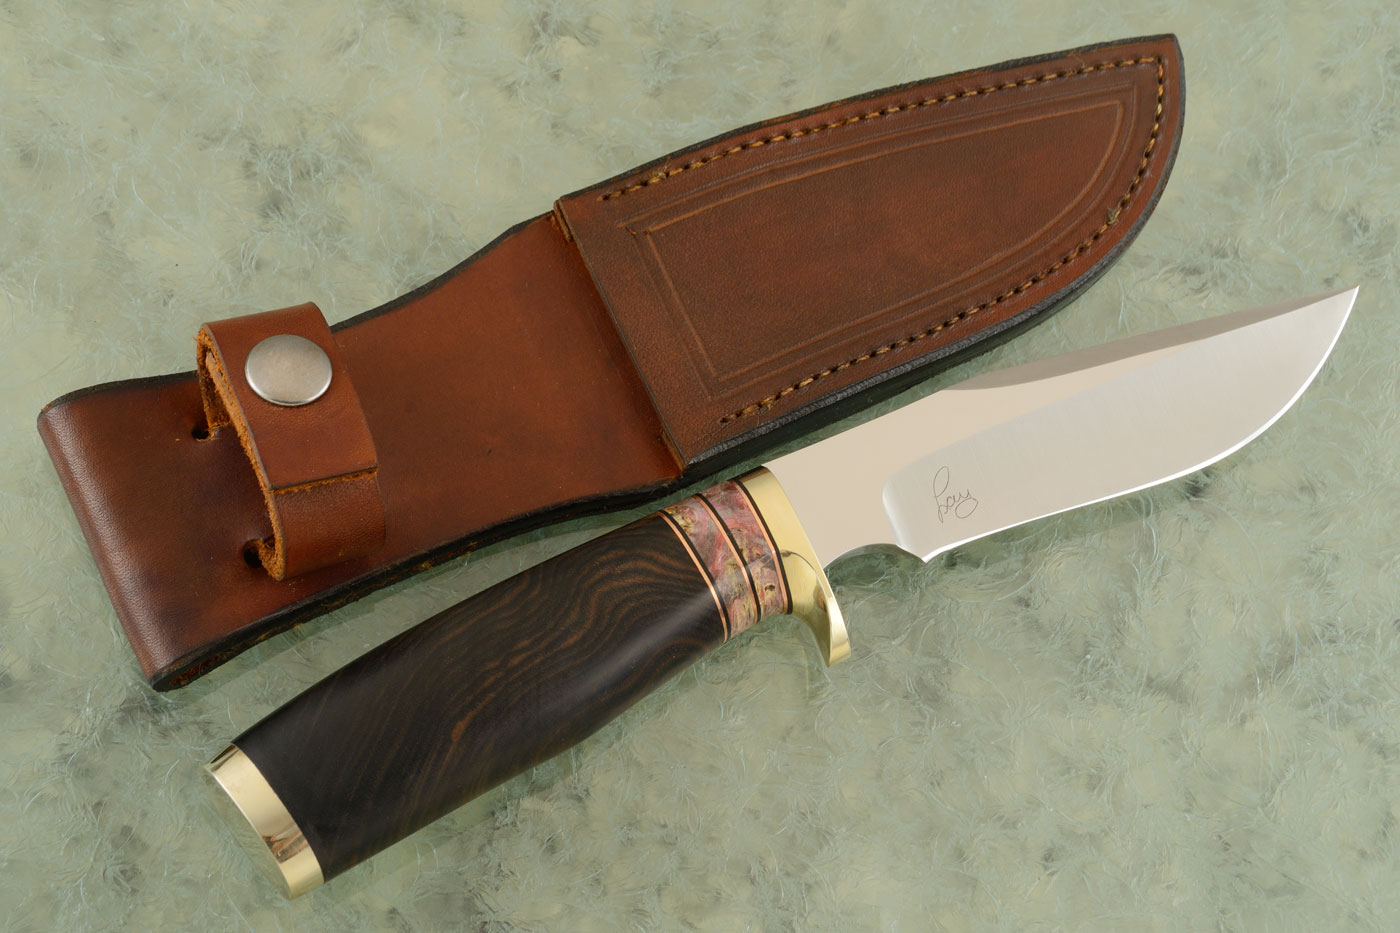 Scout with Mun Ebony and Box Elder Burl